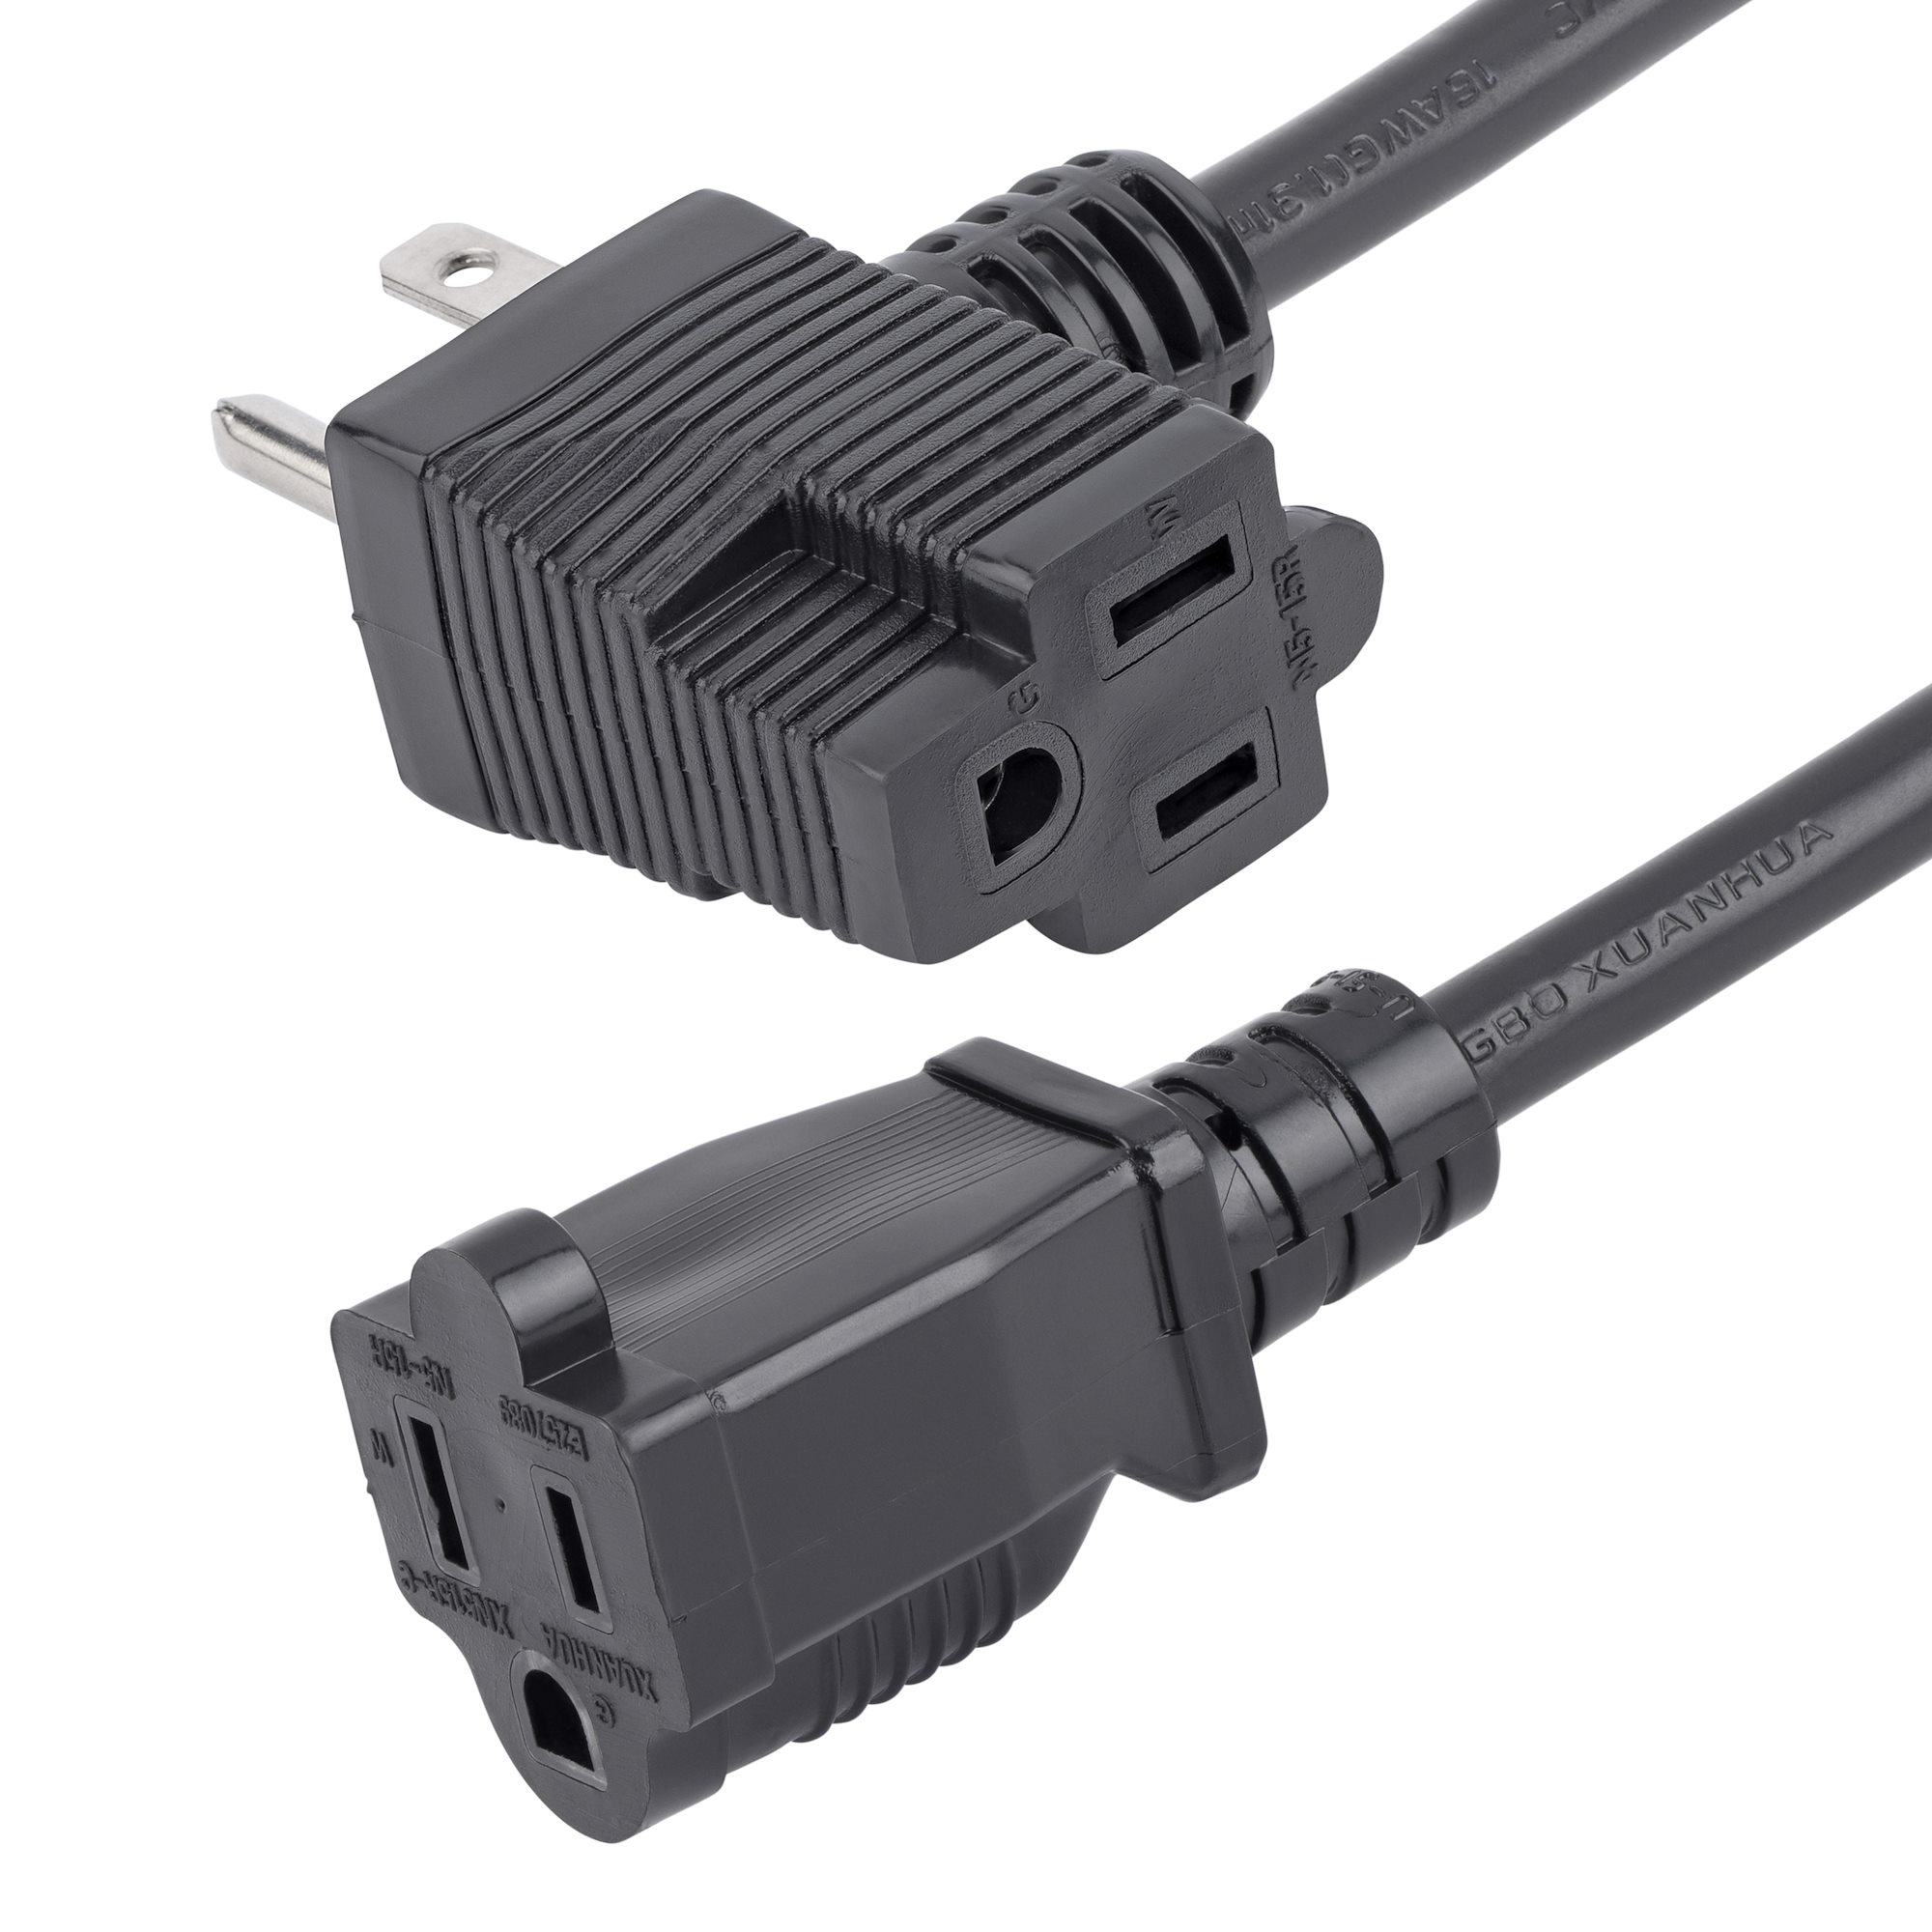 1ft Short Extension Cord, Outlet Saver - Computer Power Cables